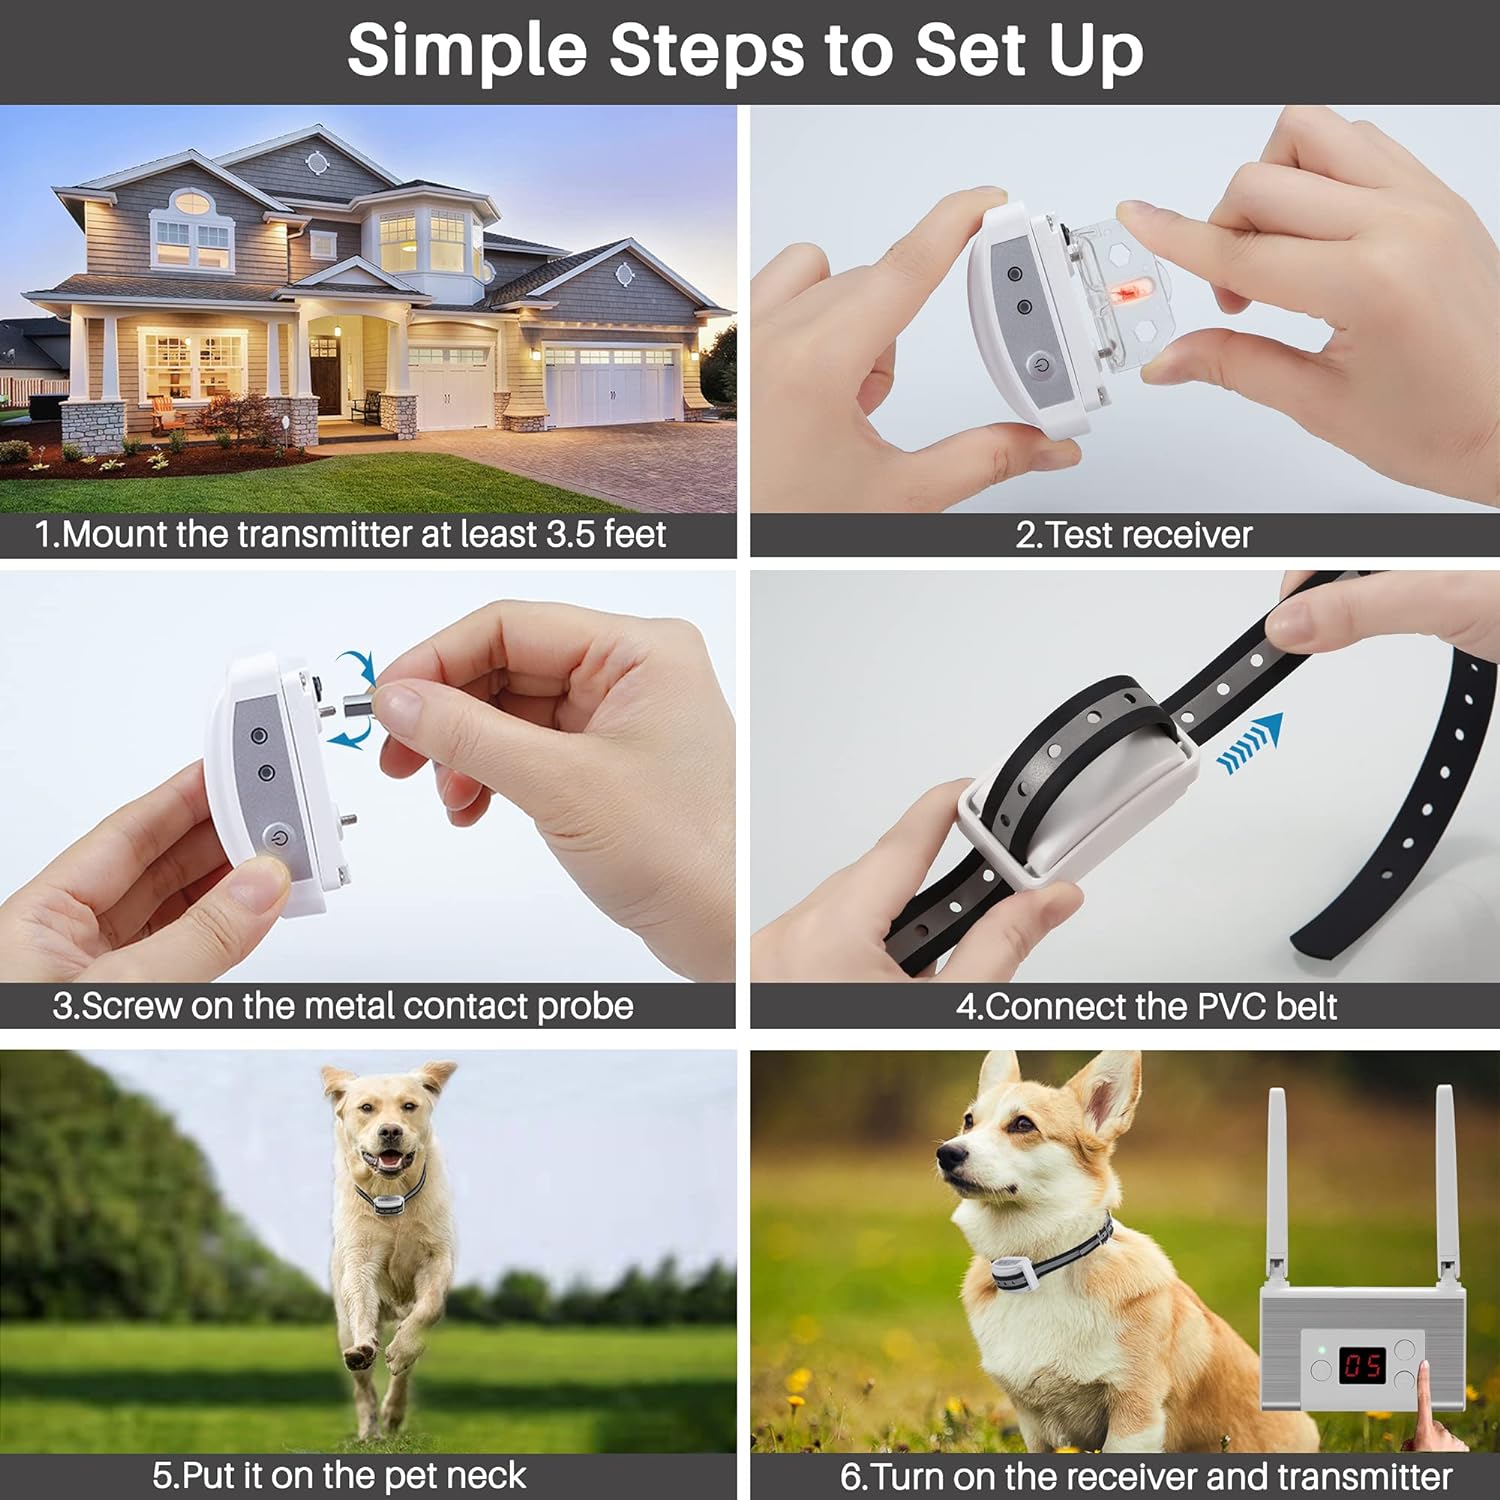 Blingbling Petsfun Electric Wireless Dog Fence System, Pet Containment System with Waterproof and Rechargeable Training Collar Receiver for 1 Dogs Pets Container Boundary (White)